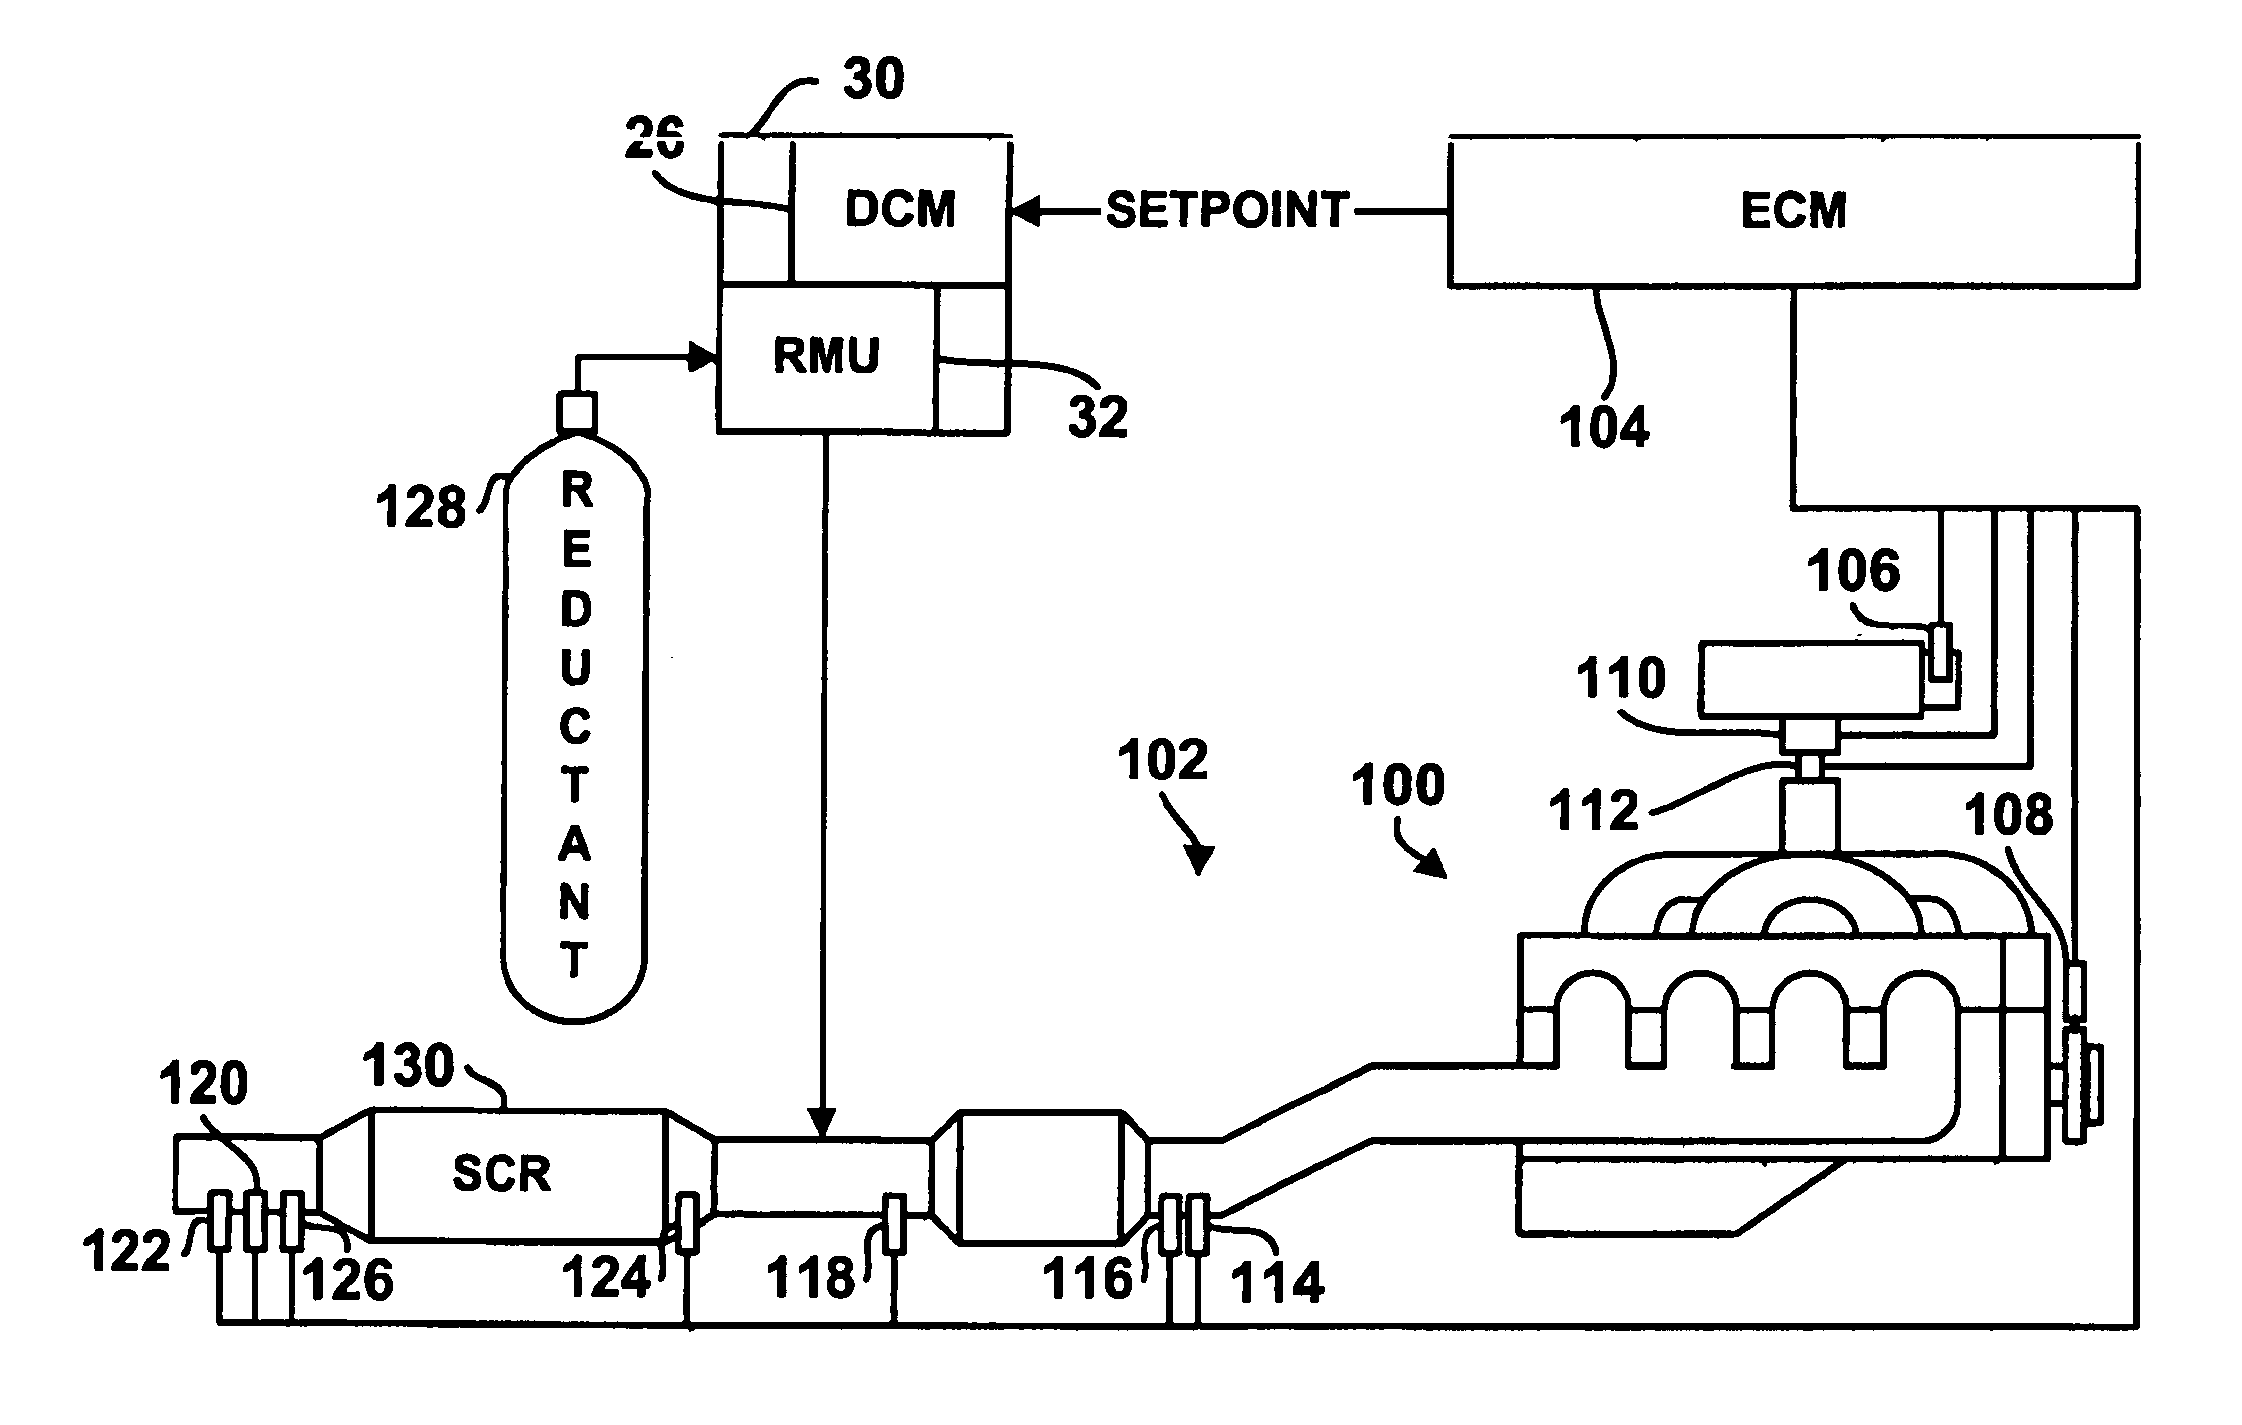 System for controlling the urea supply to SCR catalysts